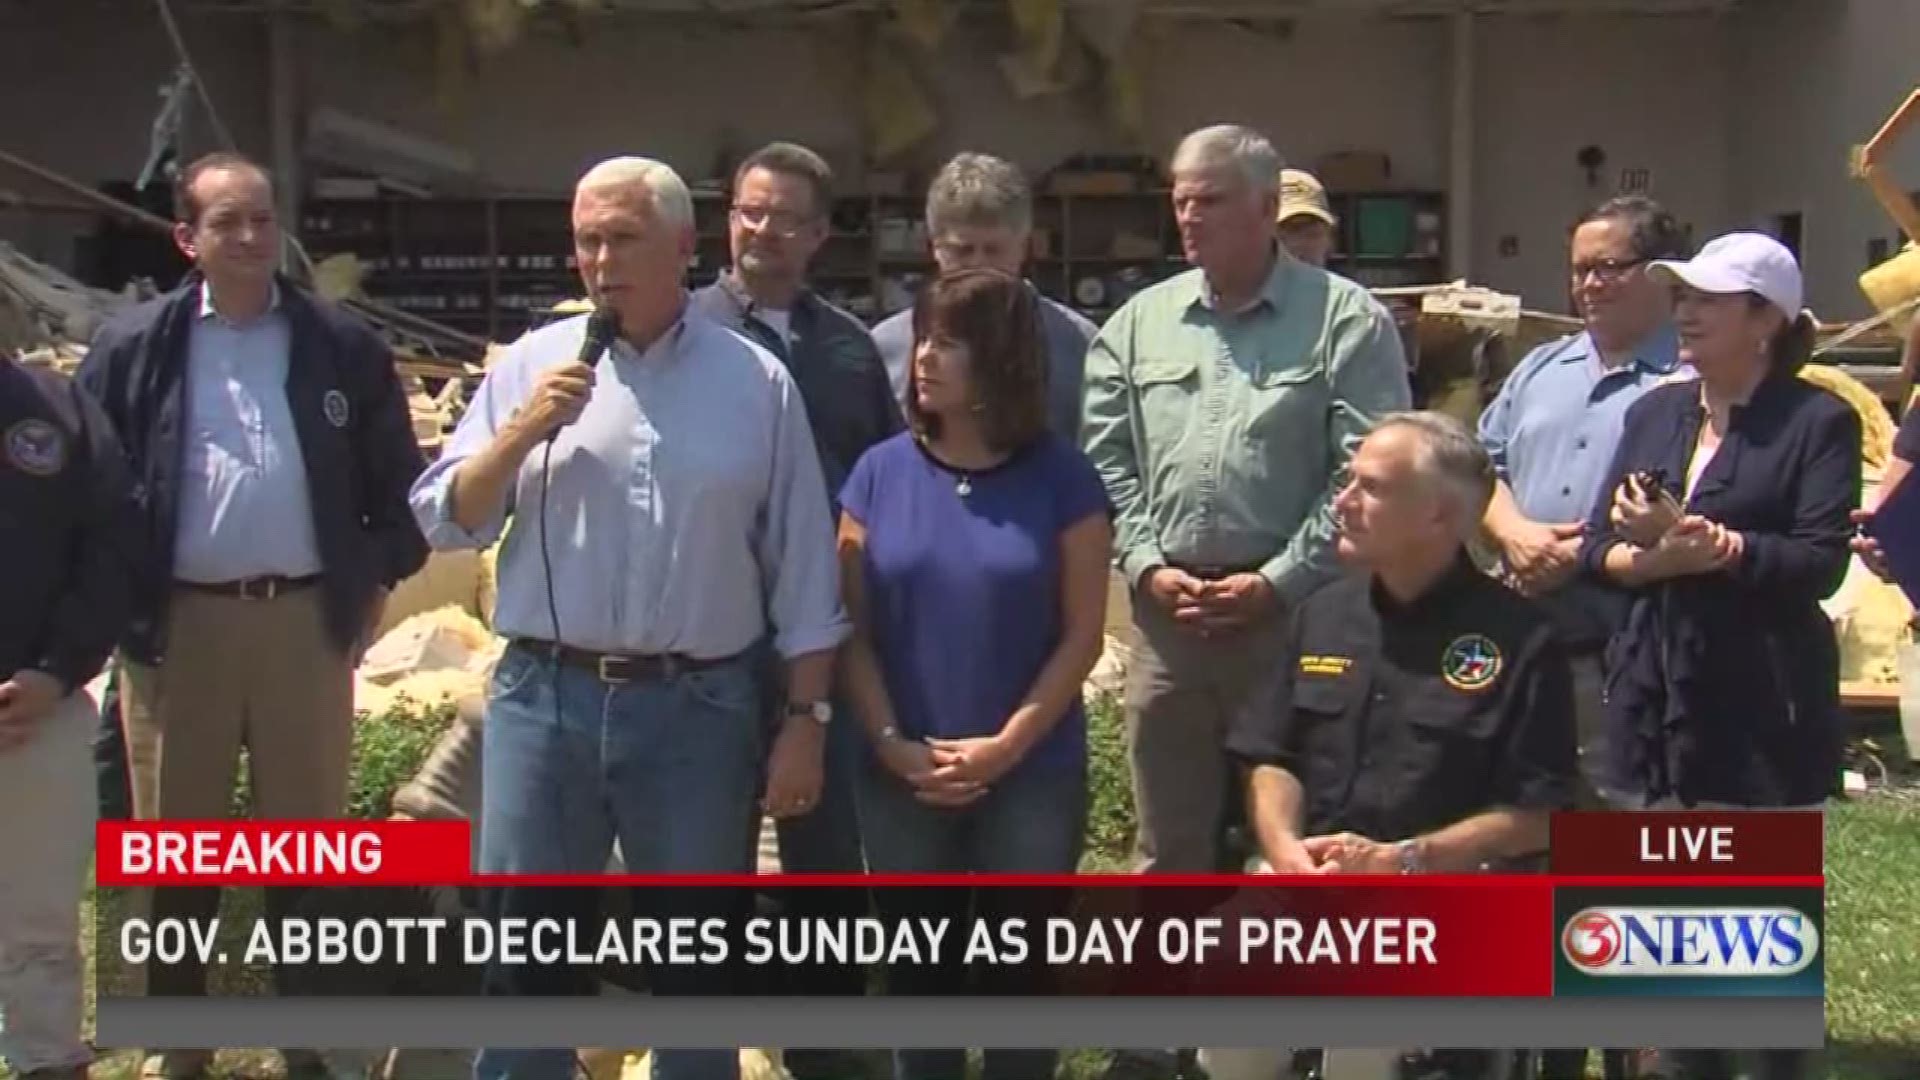 Vice President Mike Pence and Governor Greg Abbott spoke to crowds outside First Baptist Church in Rockport, Texas.